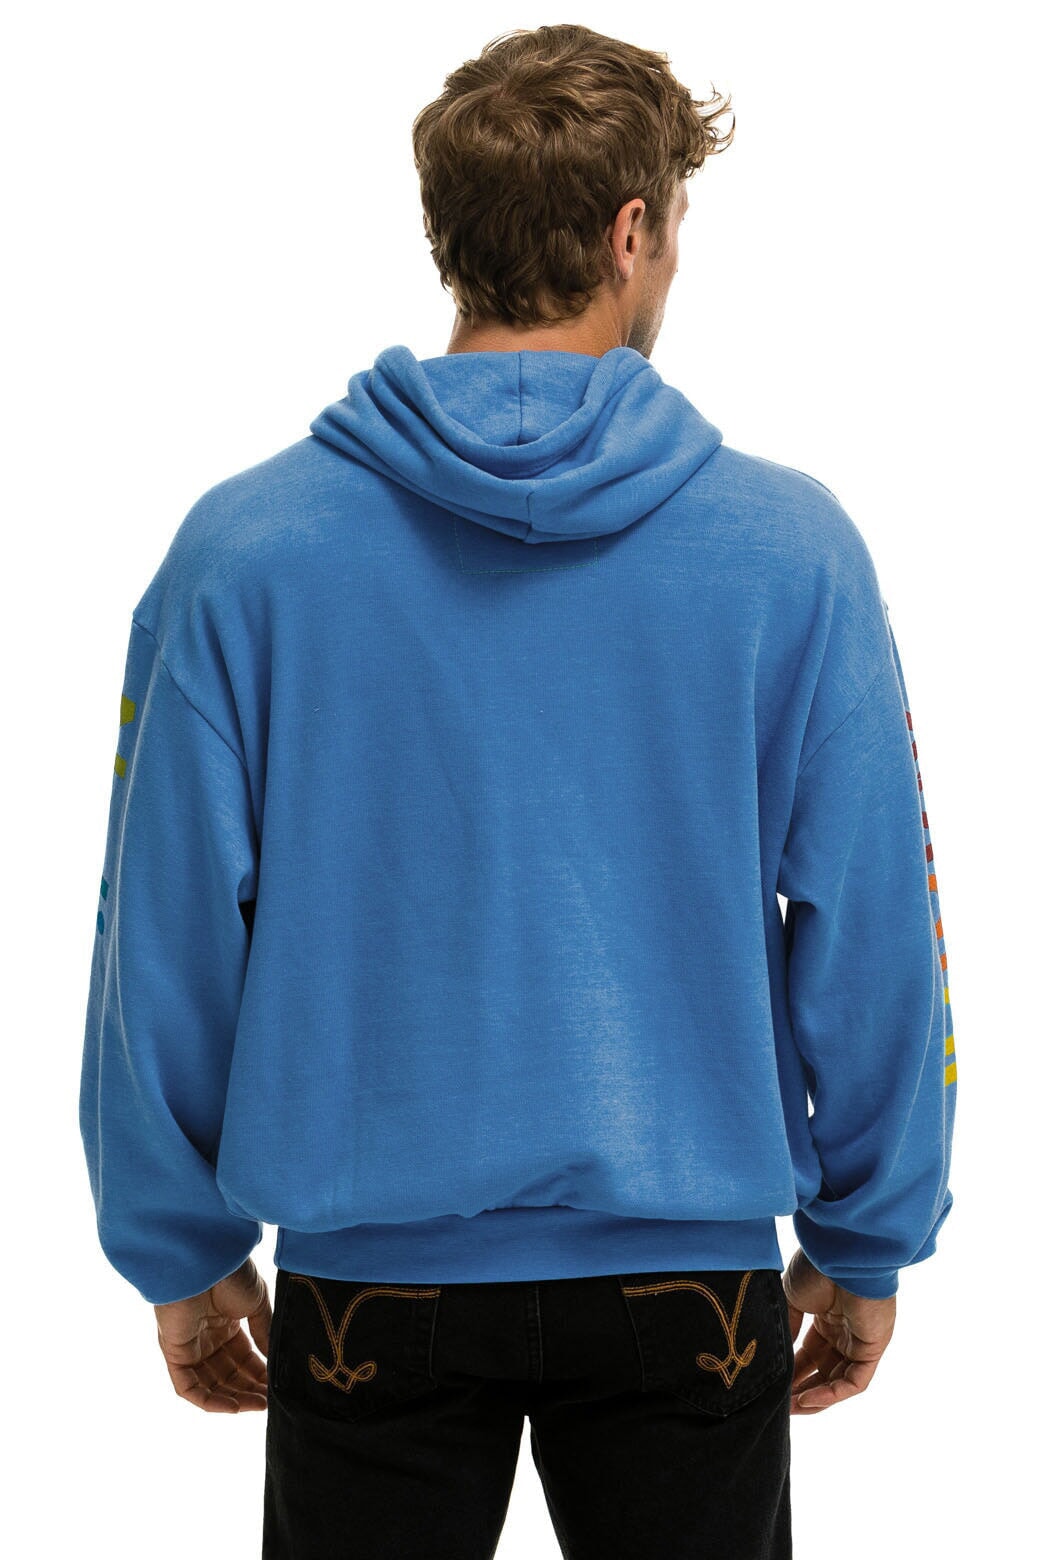 AVIATOR NATION AUSTIN RELAXED PULLOVER HOODIE - COBALT Hoodie Aviator Nation 